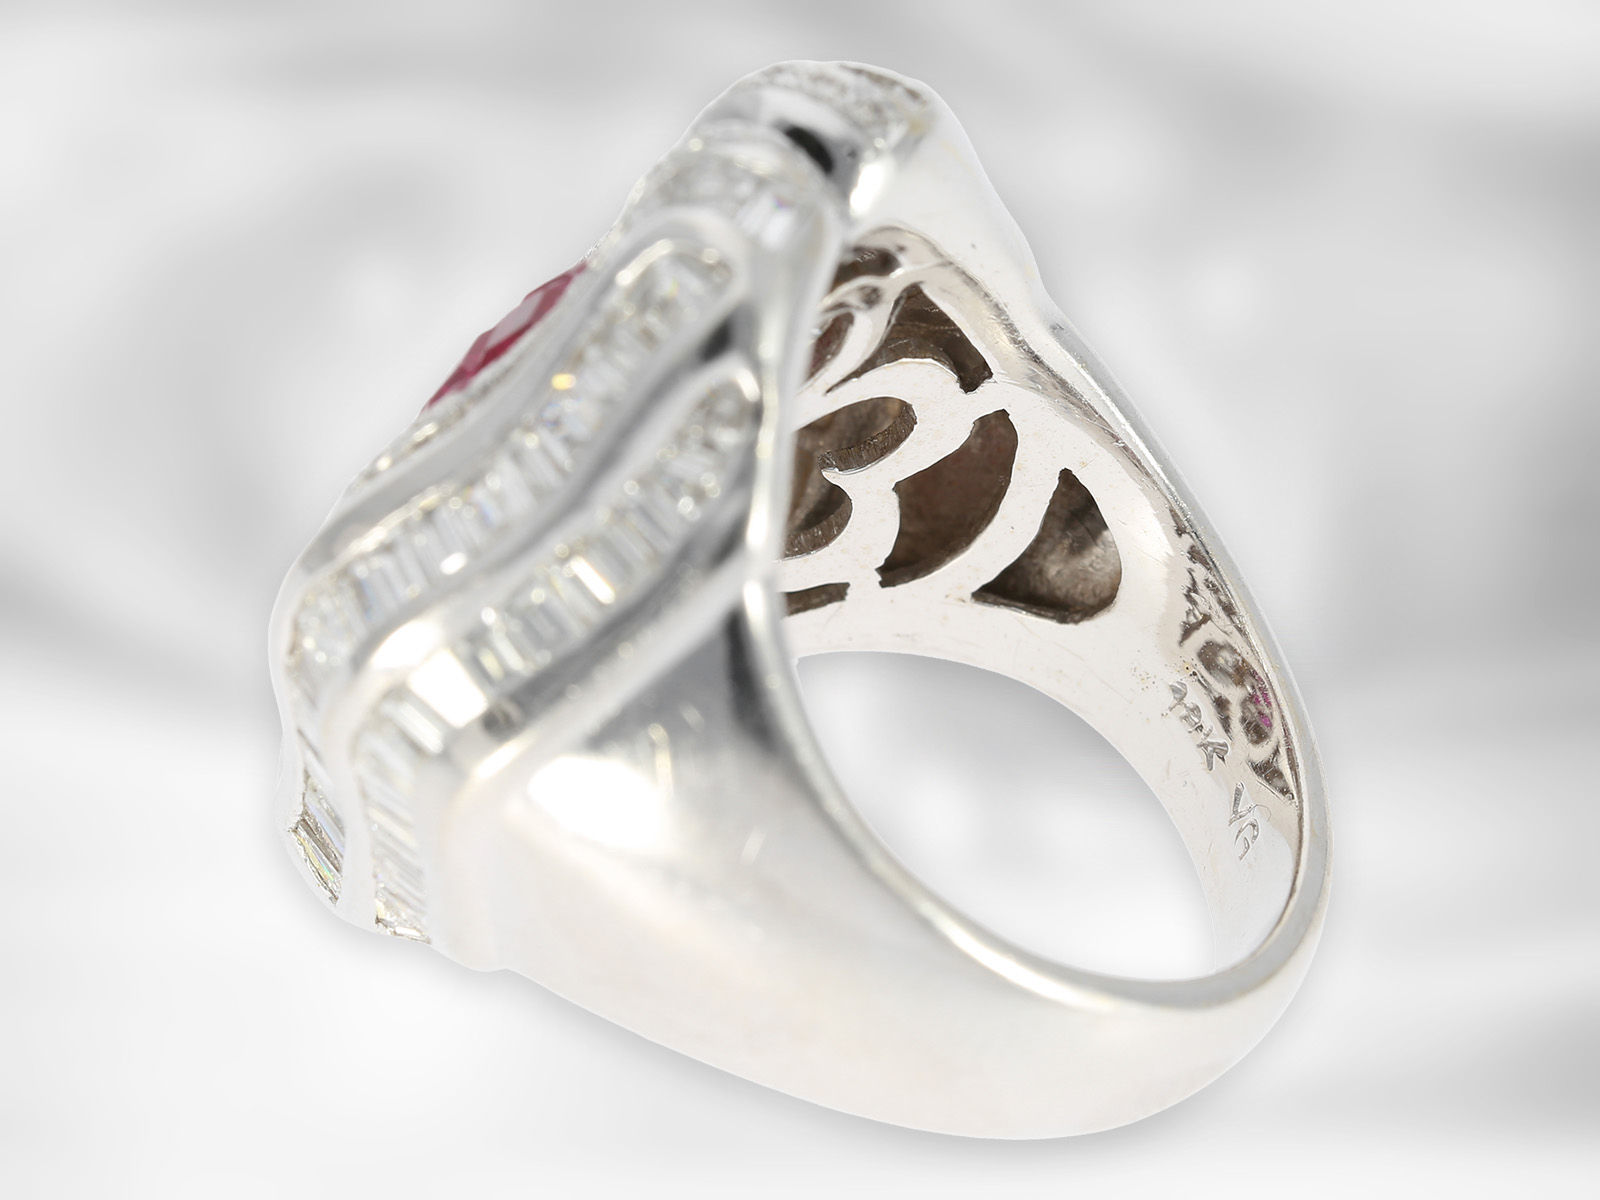 Ring: extravagant luxurious diamond/ruby ring, total approx. 5.49ct, 18K white gold, sophisticated g - Image 7 of 8